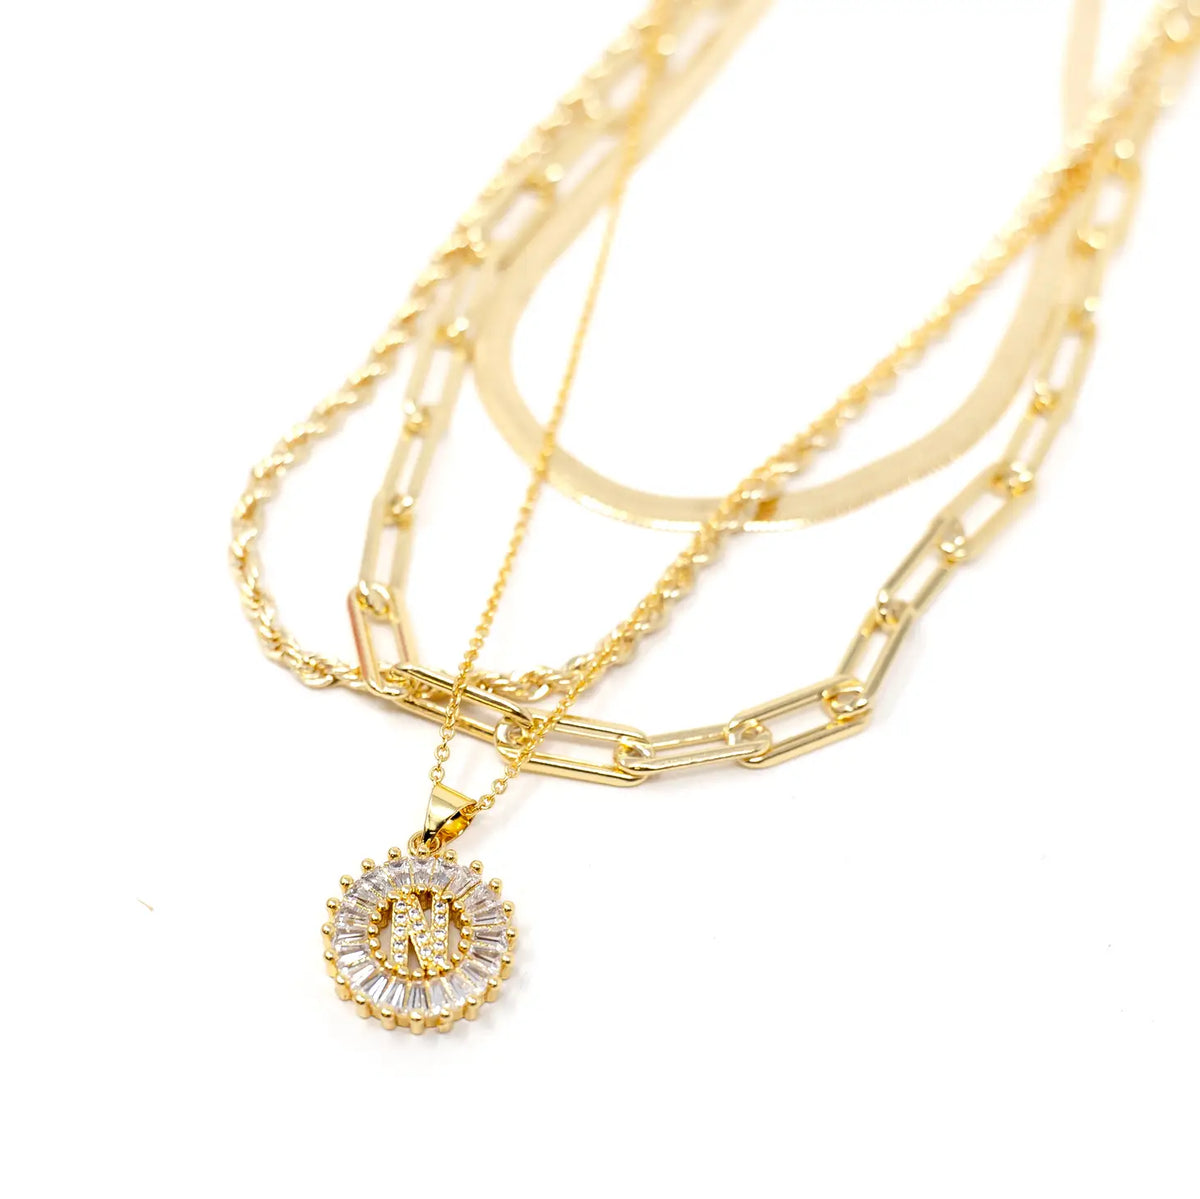 Mini Radiant Initial Necklace-Mini Radiant Initial Necklace, Initials surrounded by a circular crystal design that shines. Wear to represent yourself, kids, spouse, pets etc.!-Cali Moon Boutique, Plainville Connecticut